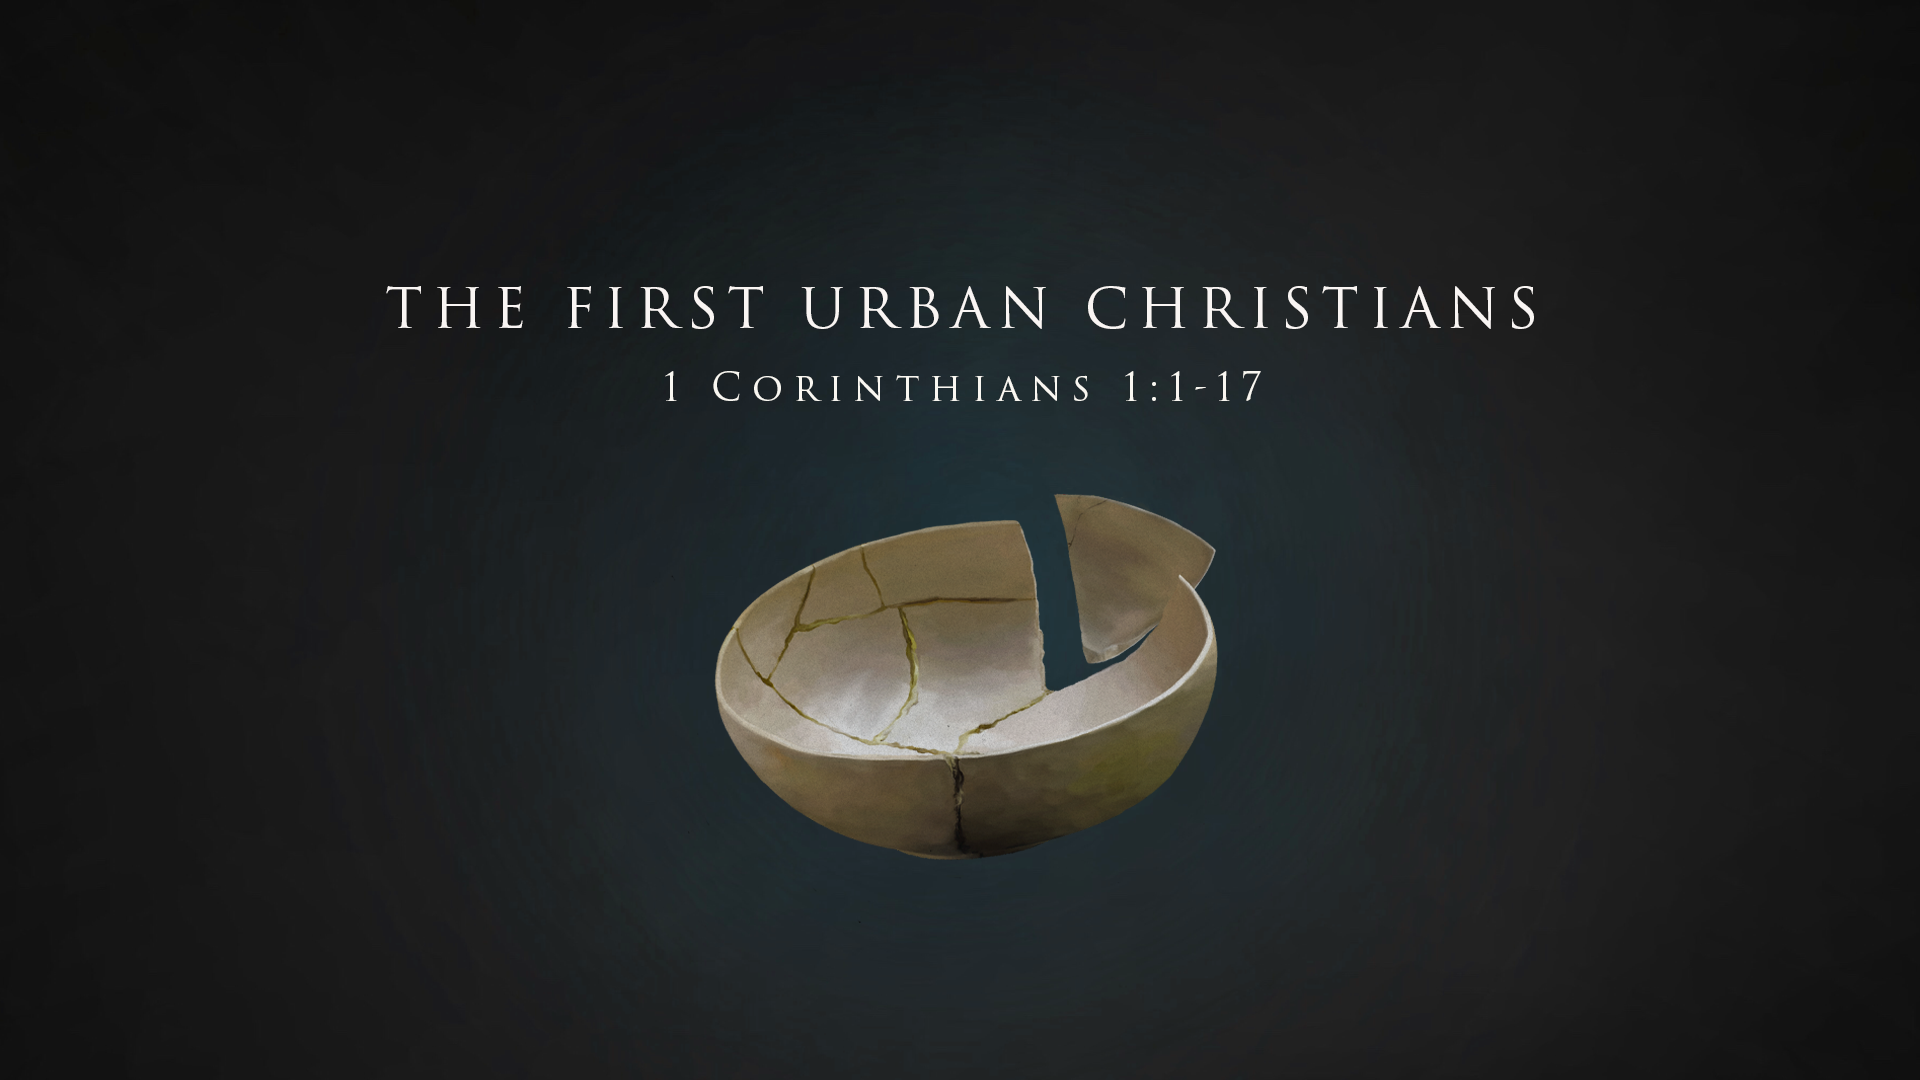 The First Urban Christians